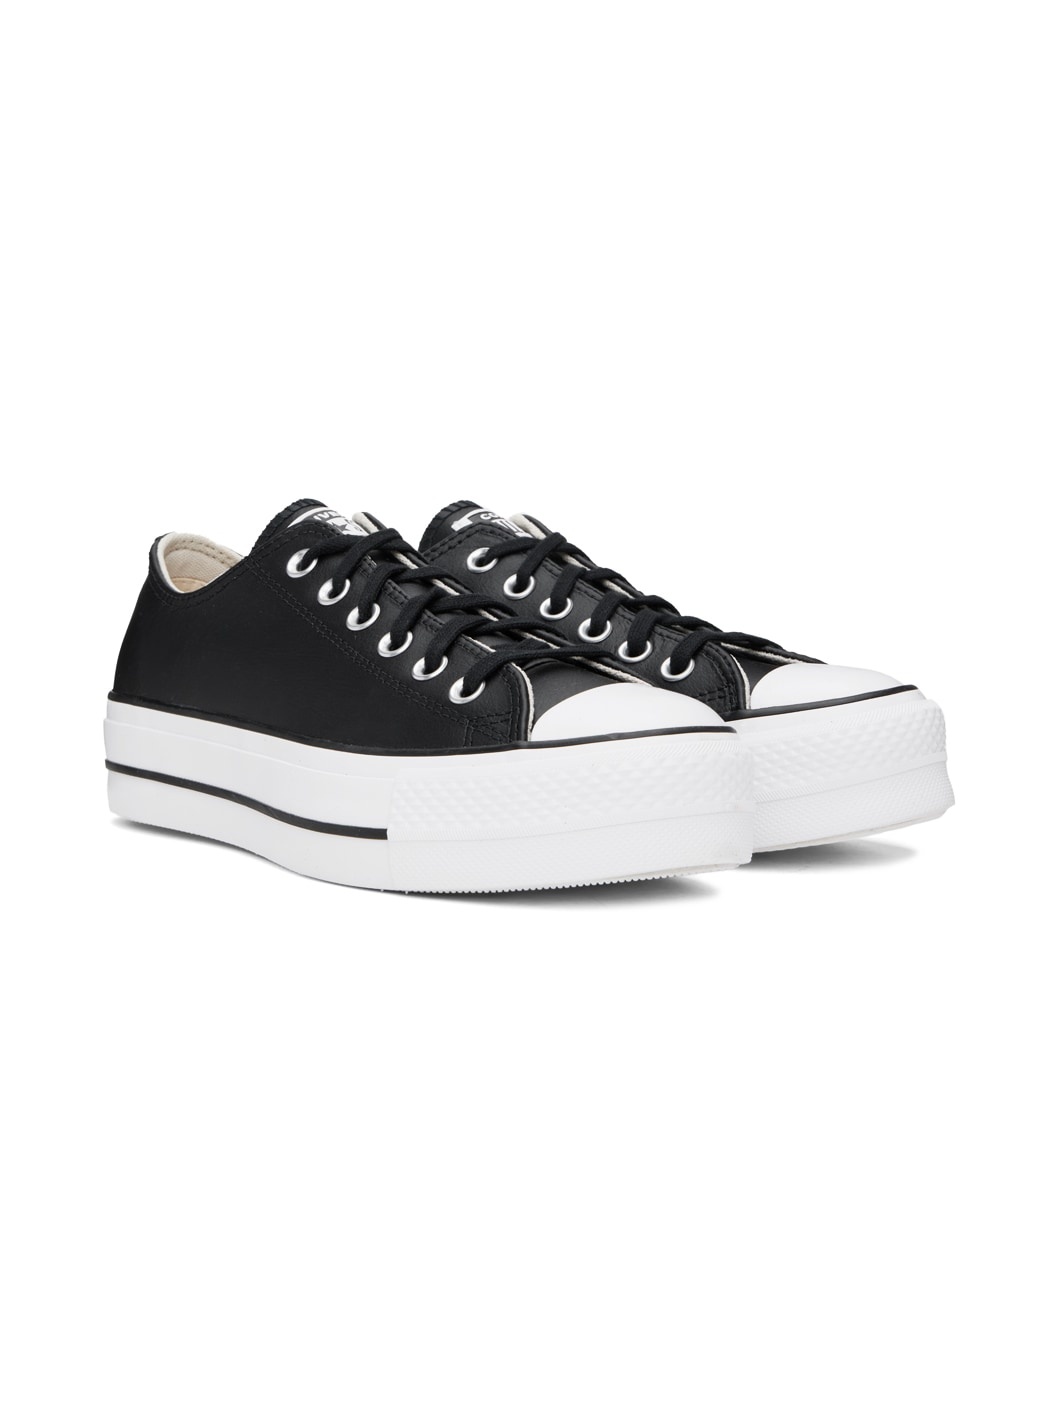 Black Chuck Taylor All Star Platform Leather Sneakers - 4